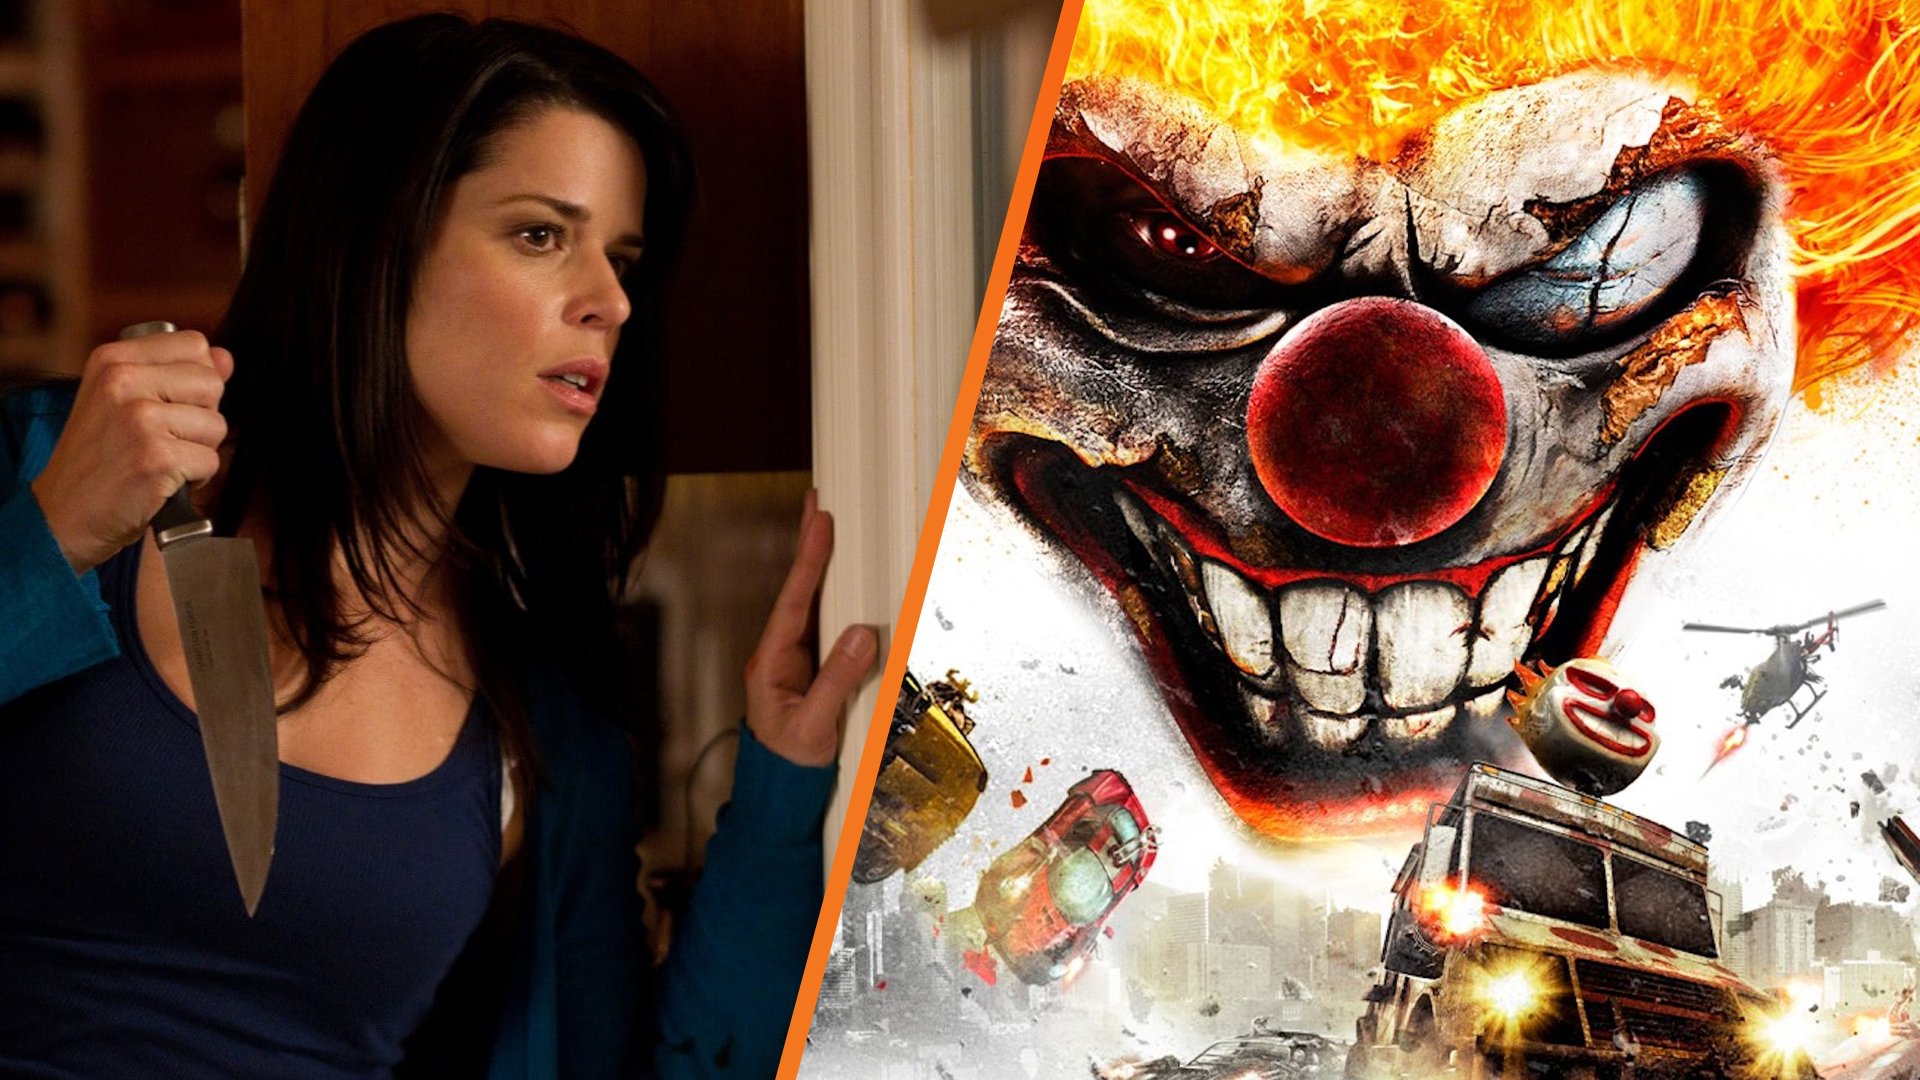 Scream's Neve Campbell will star in the Twisted Metal TV show